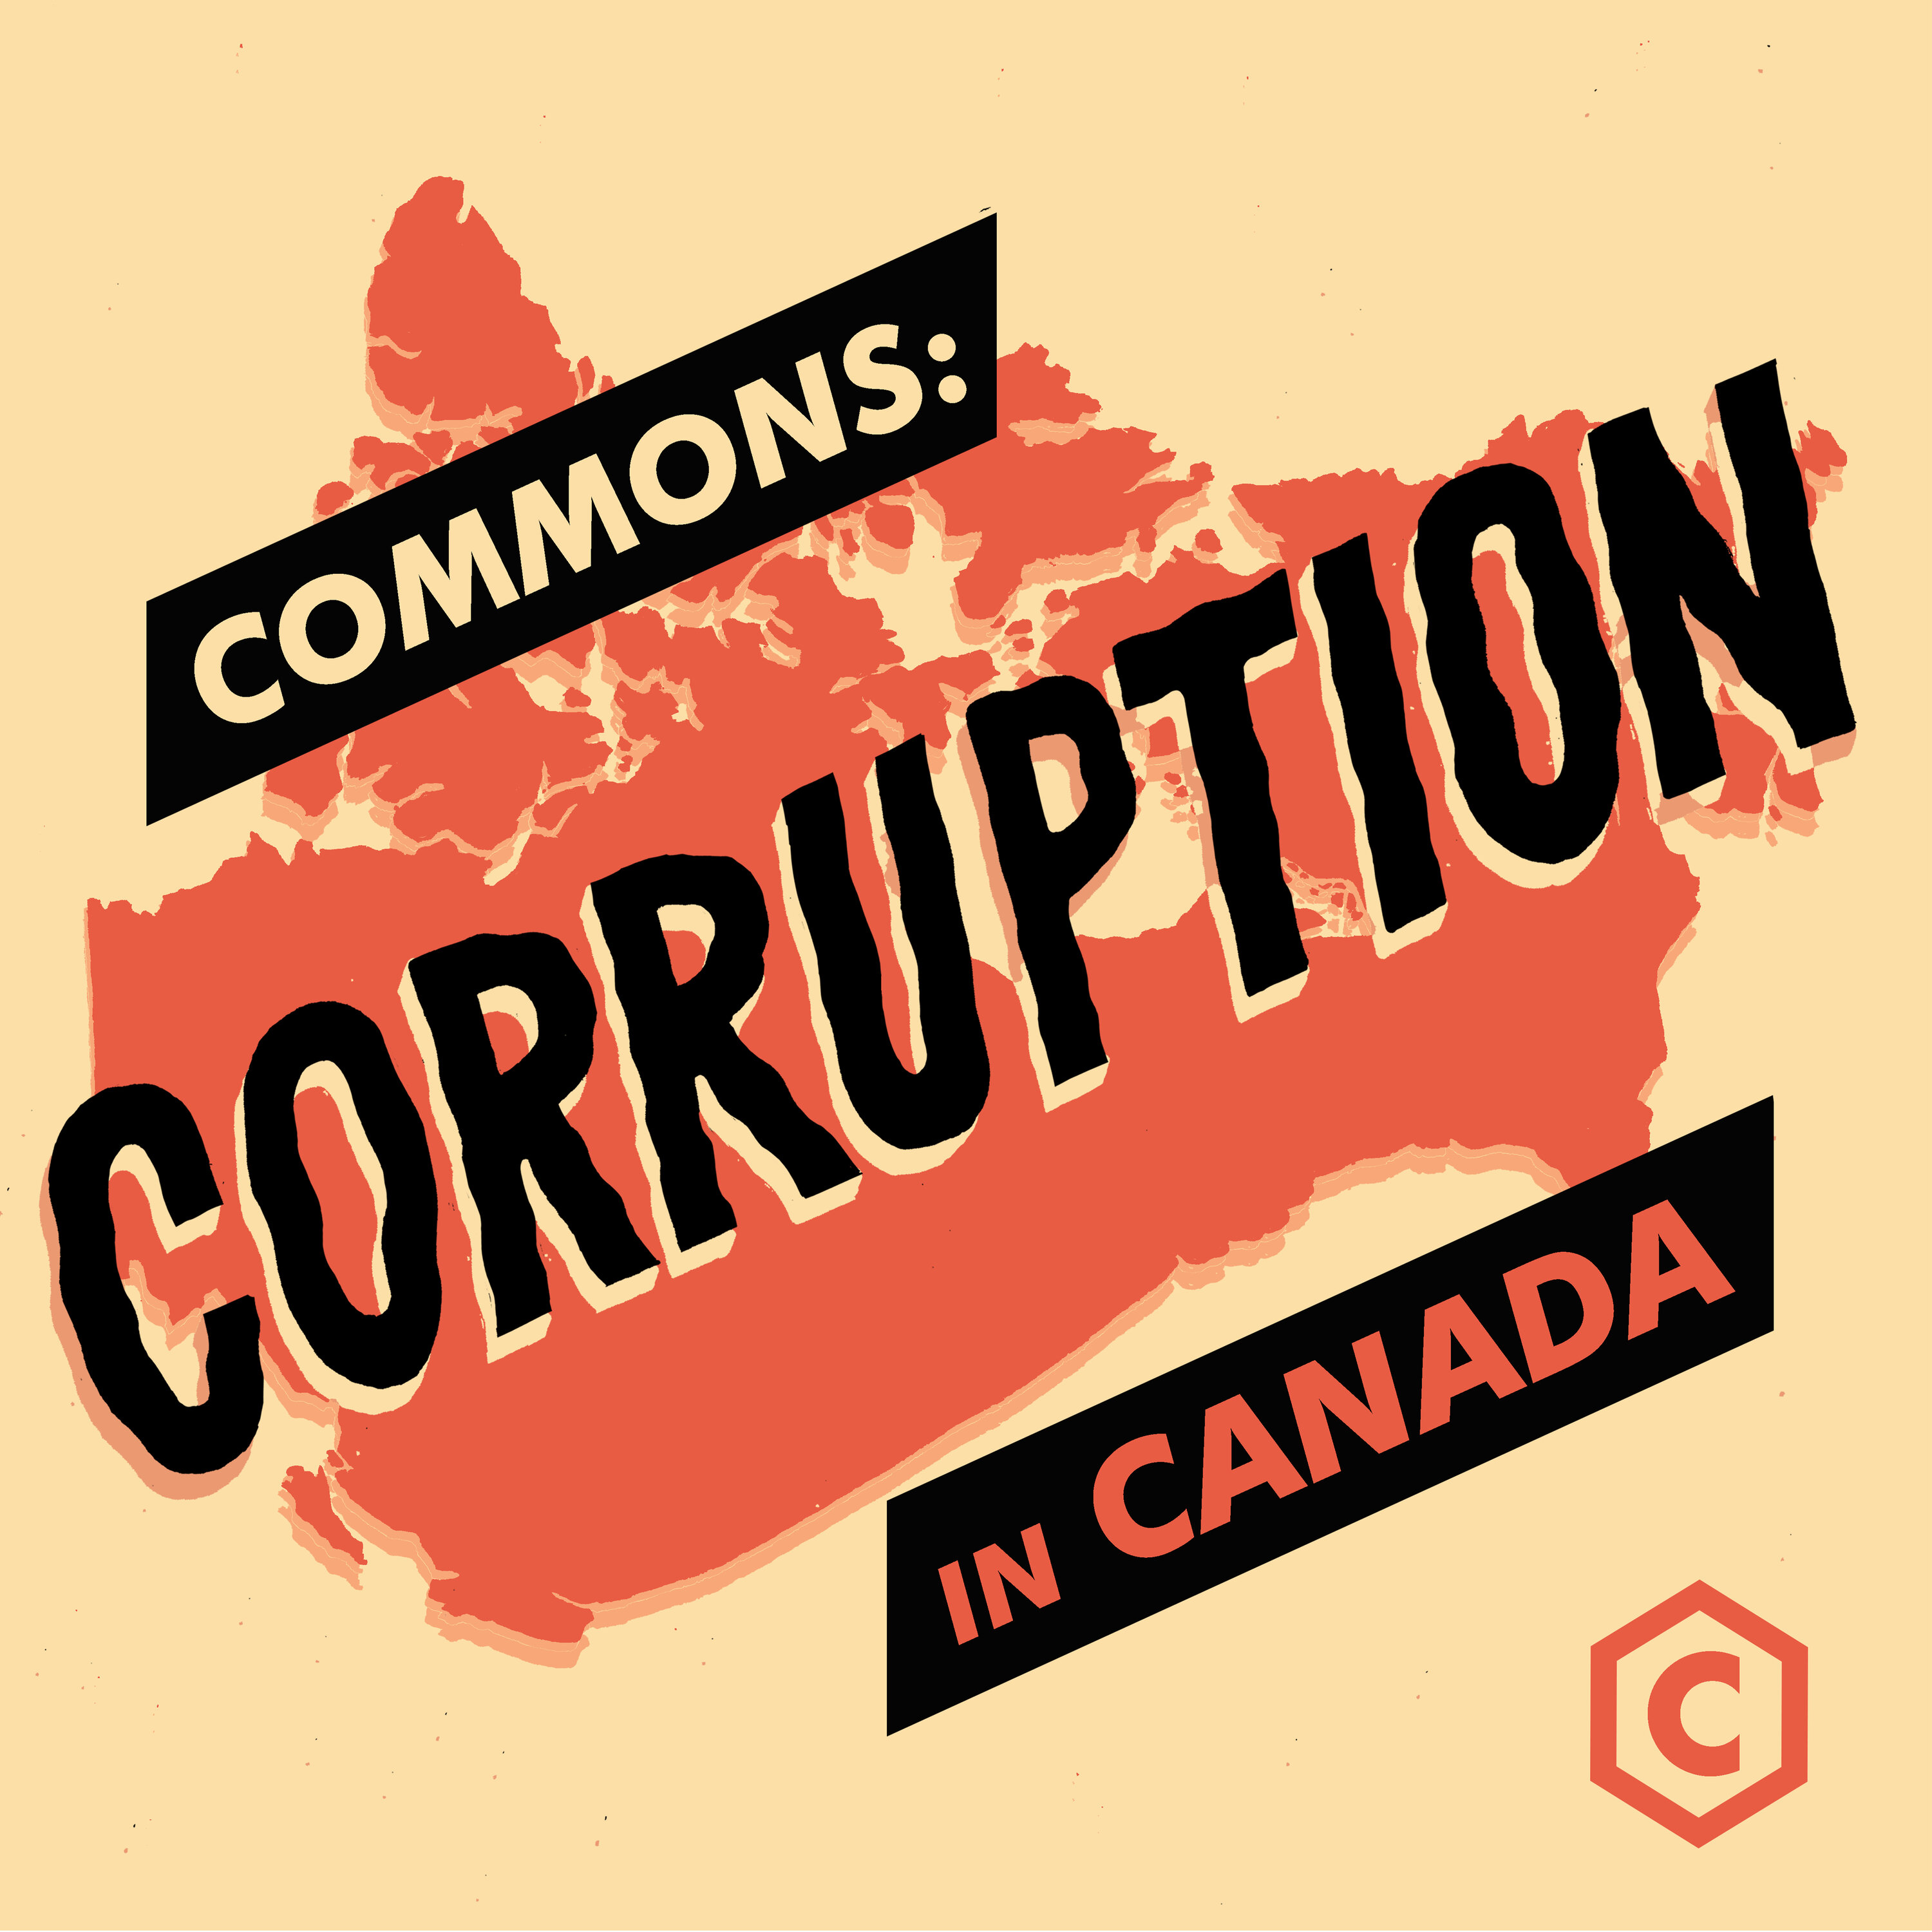 CORRUPTION 10 - The Canadian Company Accused of Using Slaves Today